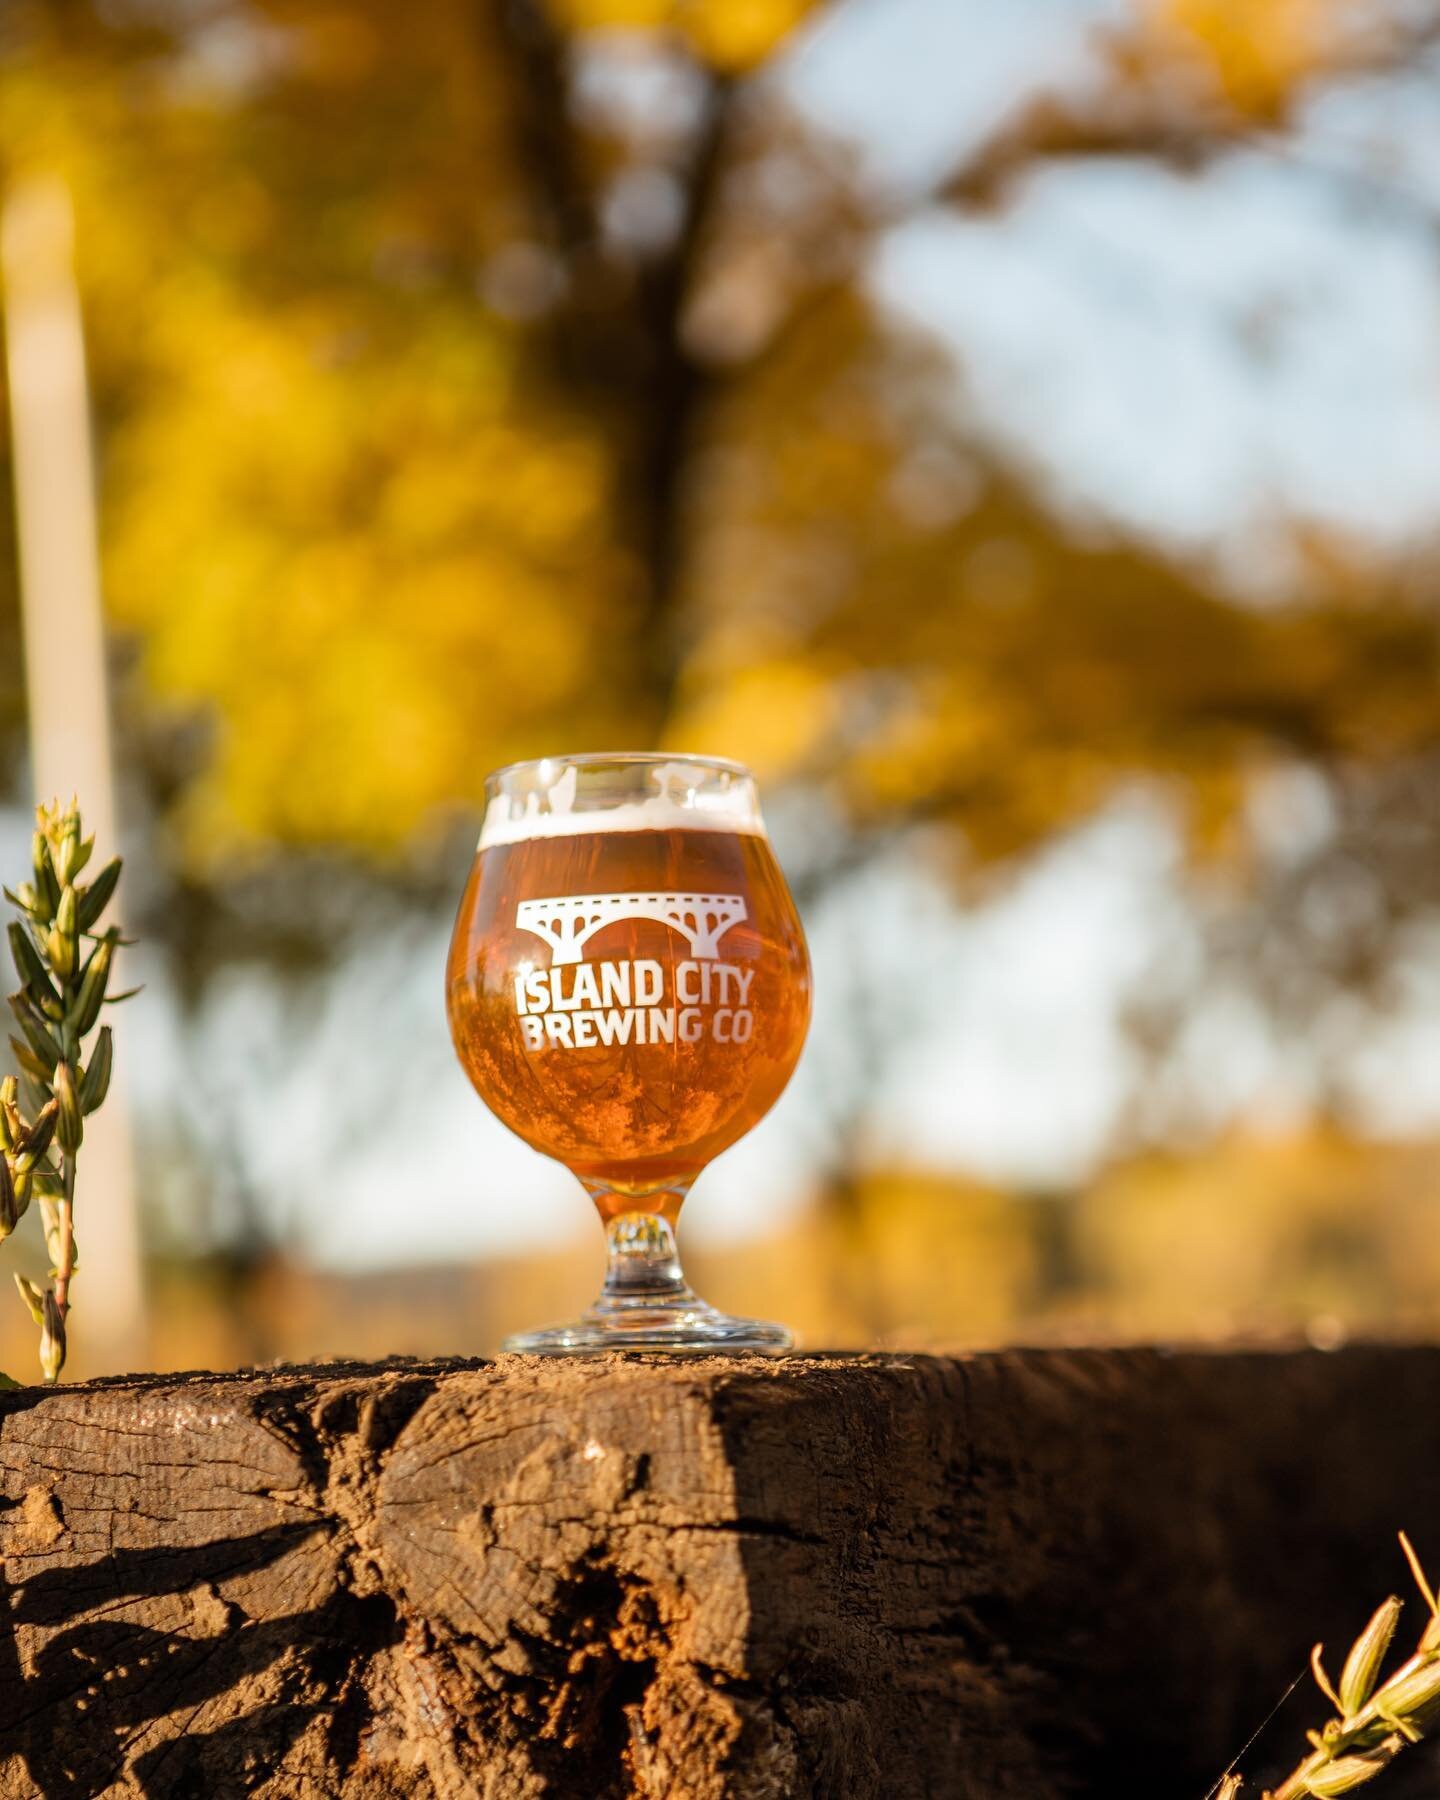 Pilot Batch #32 has been tapped! Sip on a pint of this Wet Hopped New England IPA while enjoying the cool fall breeze and beautiful colors. This brew includes freshly picked hops from Winona&rsquo;s own, Prairie Island.